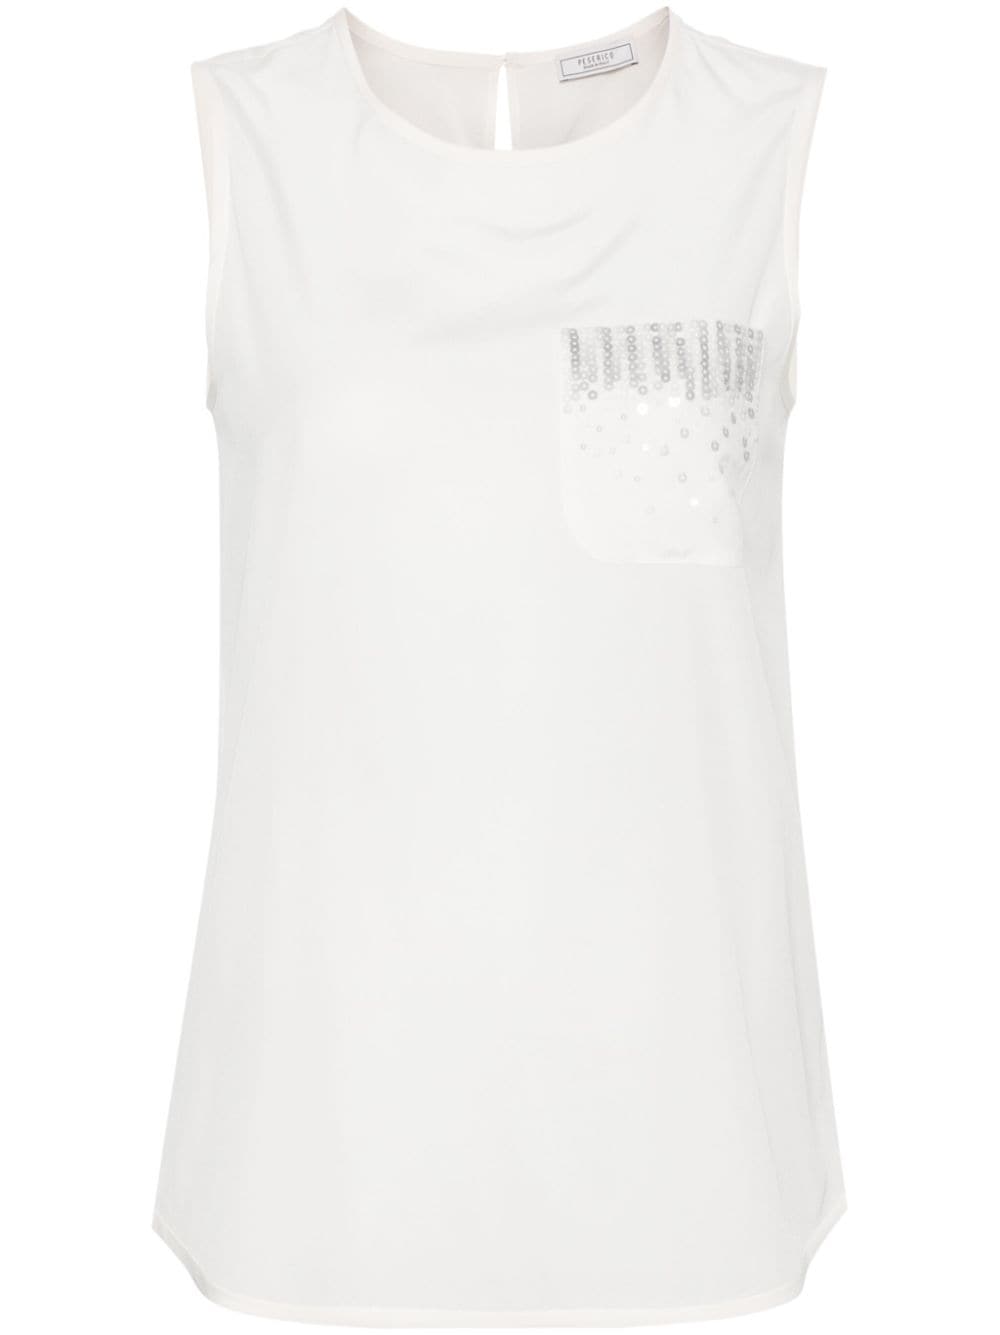 Peserico sequin-embellished top - White von Peserico